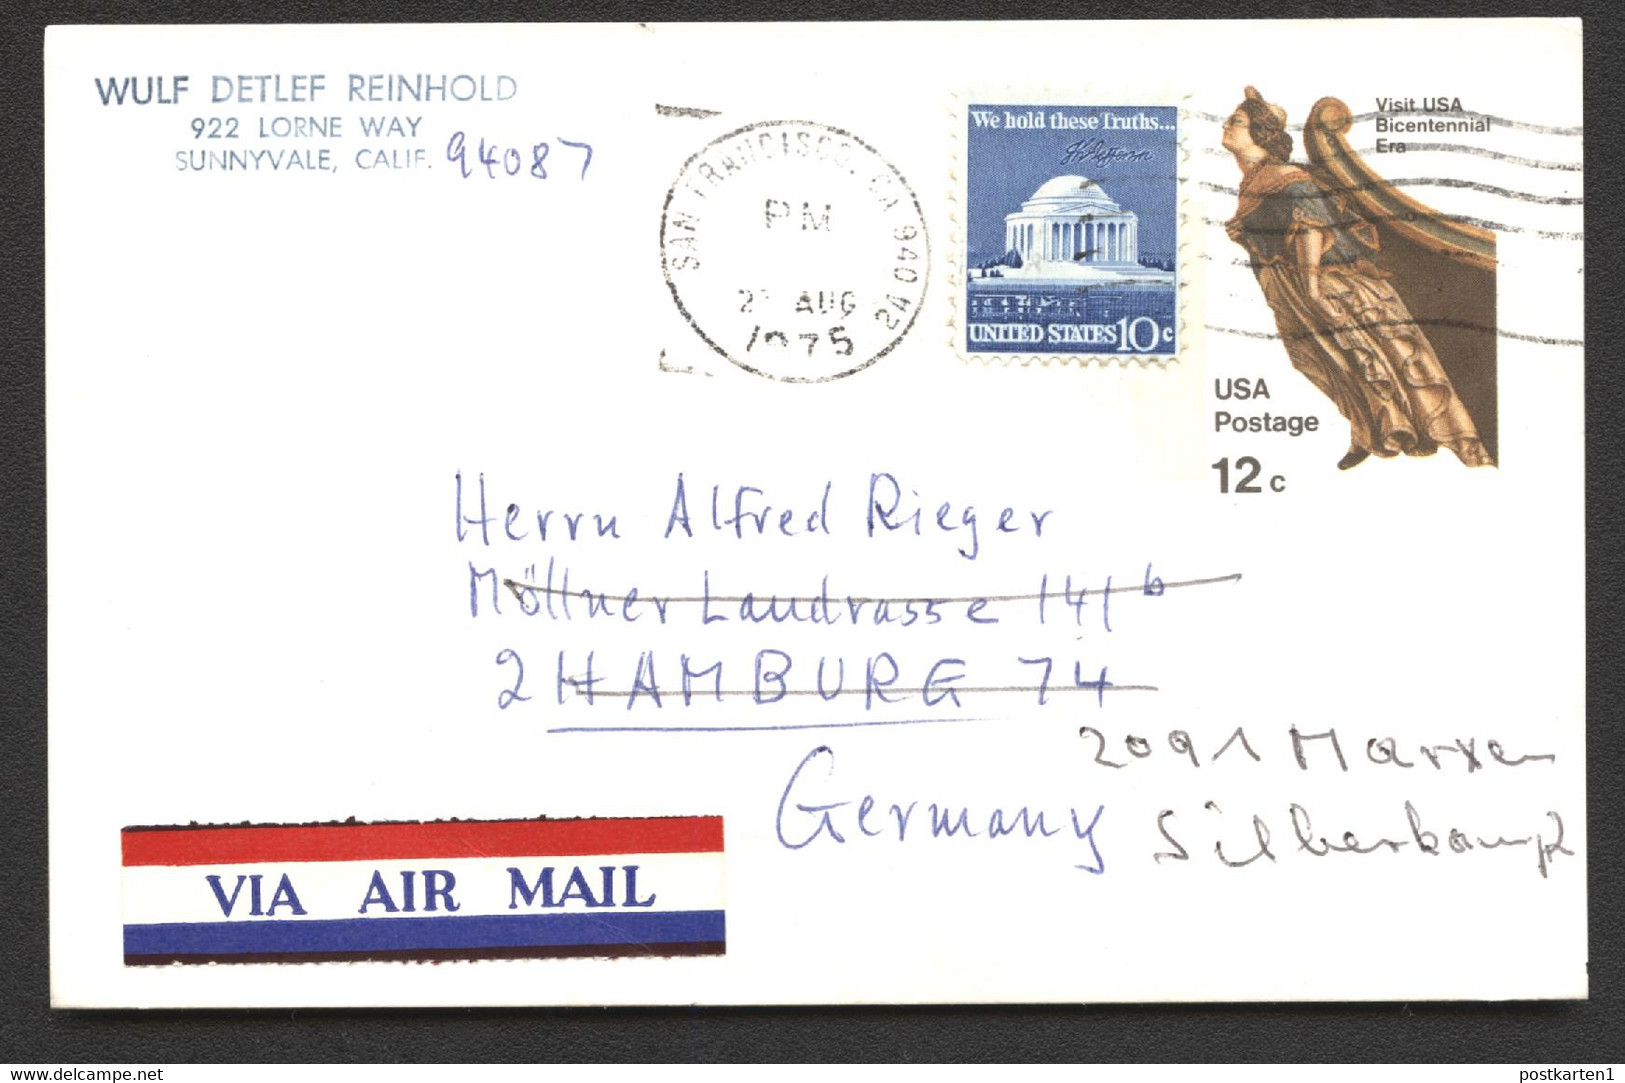 UX67 UPSS S84 Postal Card California Used To GERMANY Airmail 1975 Cat. $50.00+ - 1961-80